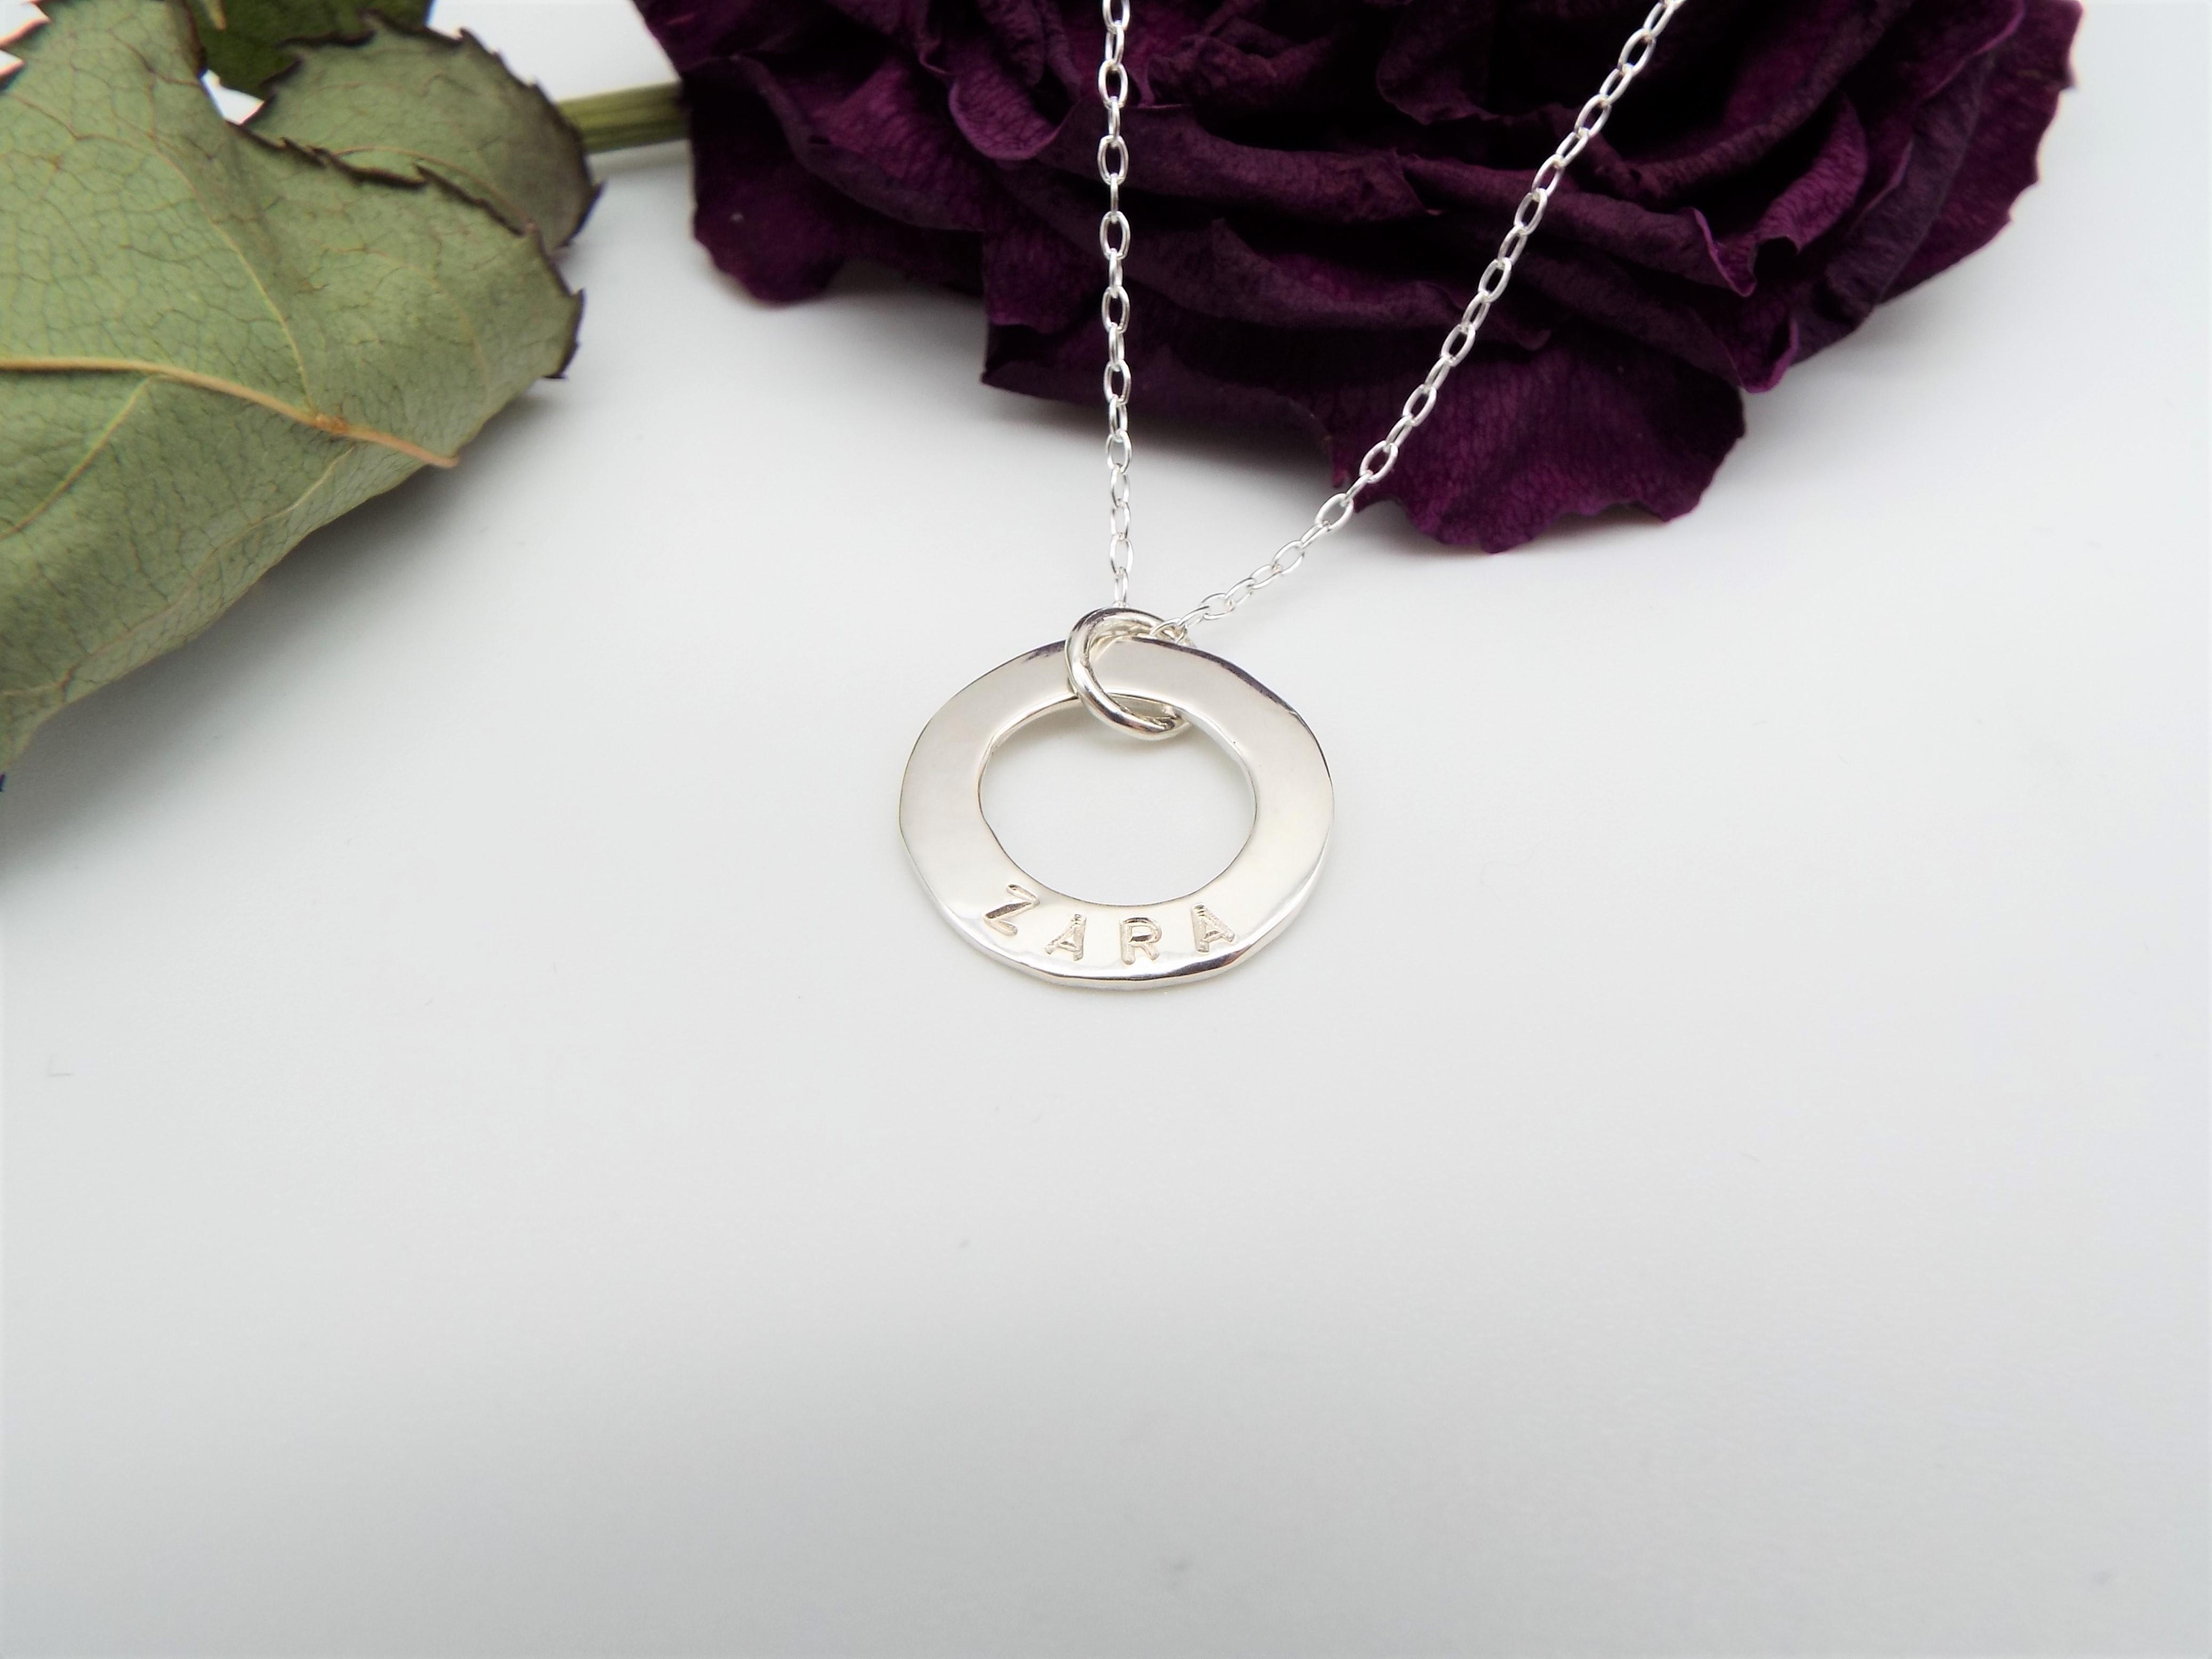 Silver Circle necklace personalised with a name